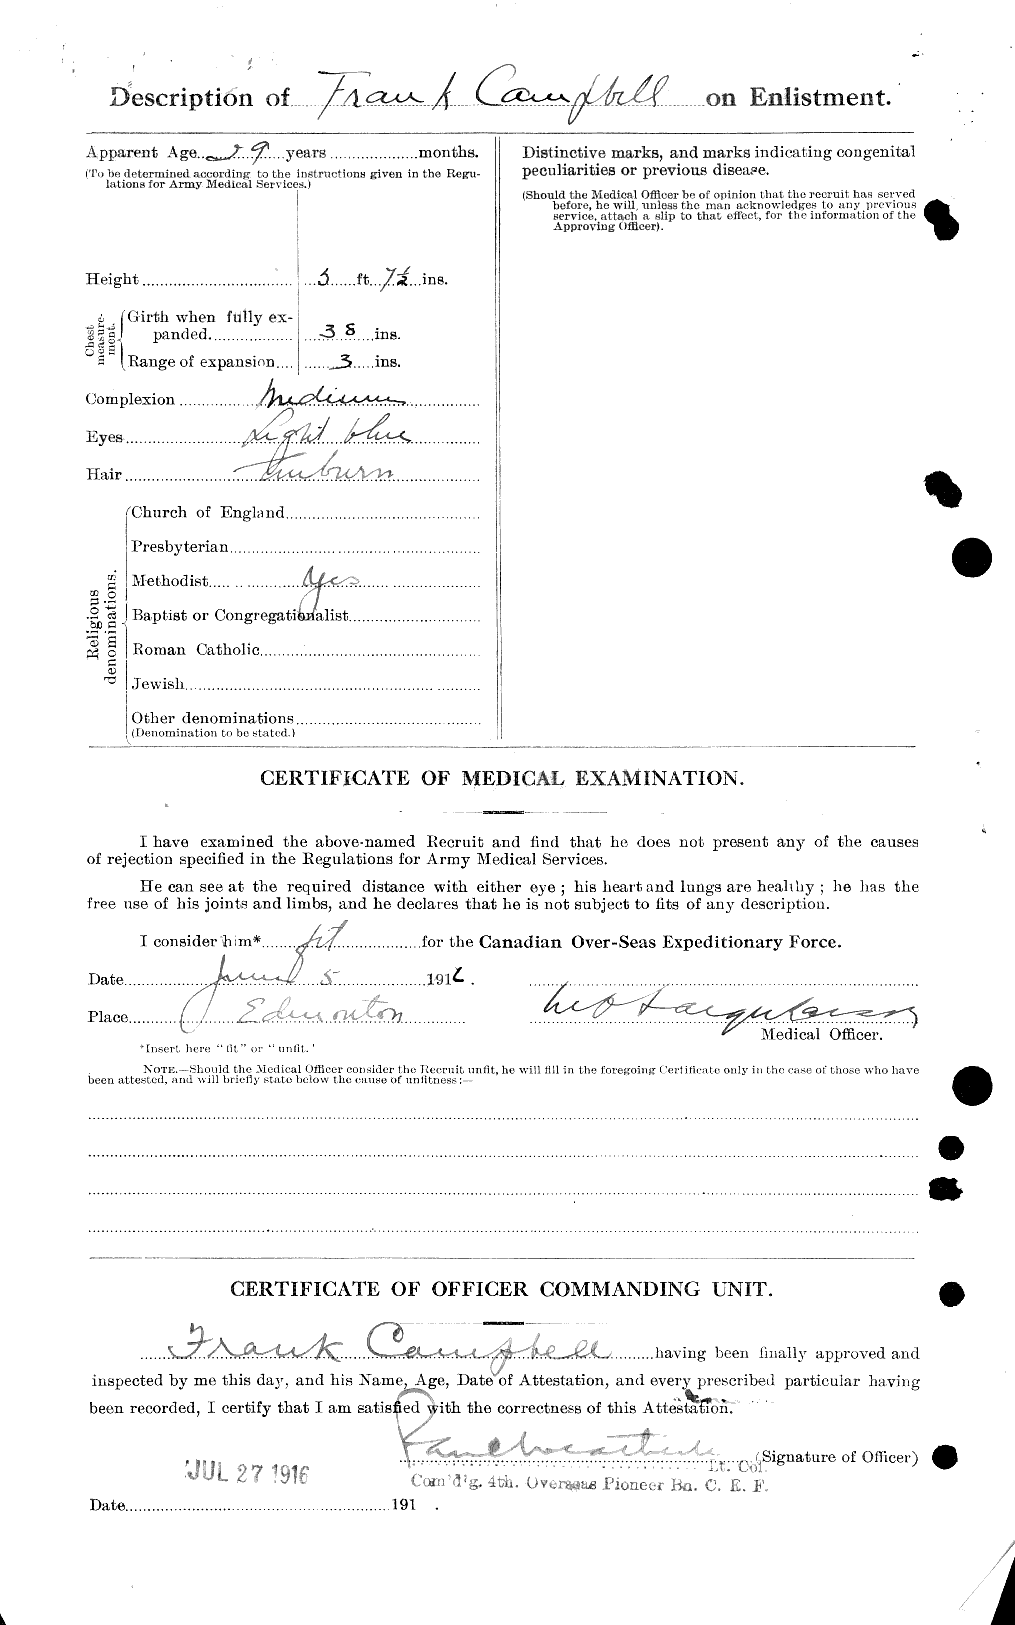 Personnel Records of the First World War - CEF 008273b